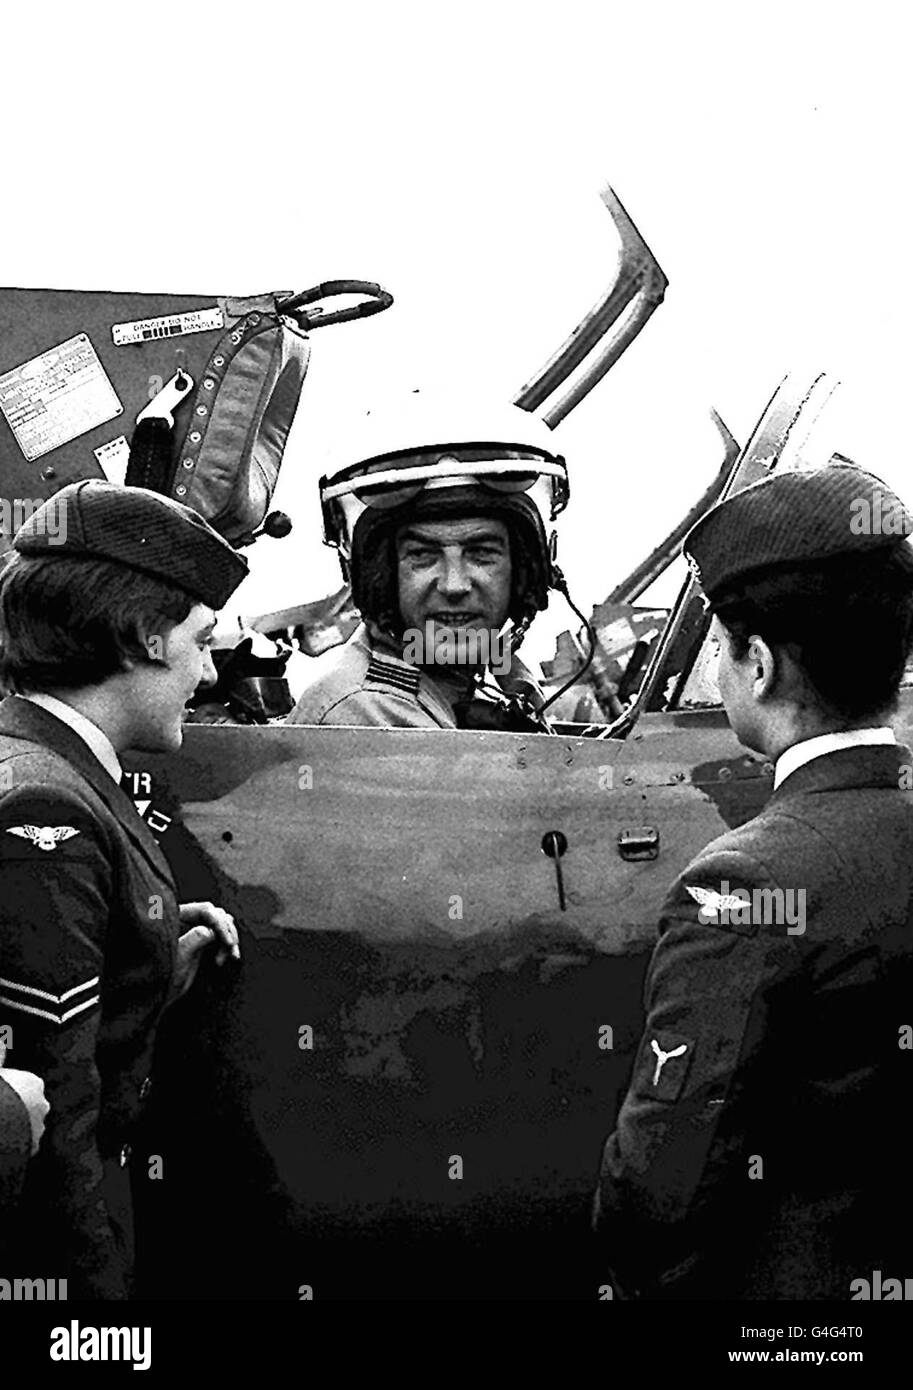 Library file dated SEPT 1965 of Pilot Raymond E.W. Loverseed. It has emerged today (Sunday) that the 50-seater passenger aircraft which spiralled into a hillside and exploded in a fireball was being piloted by two pensioners. Police named the men who died as 68-year-old Captain Raymond Loverseed, from Sussex (shown), and 72-year-old Adam Saunders, from Toronto, Canada. The men - the only people on board the aircraft - died when the four-engine turbo-prop Dash 7 crashed at Owlescombe Cross, near Ashburton, Devon, yesterday morning (Saturday). PA photo. See PA story AIR Dash. Stock Photo